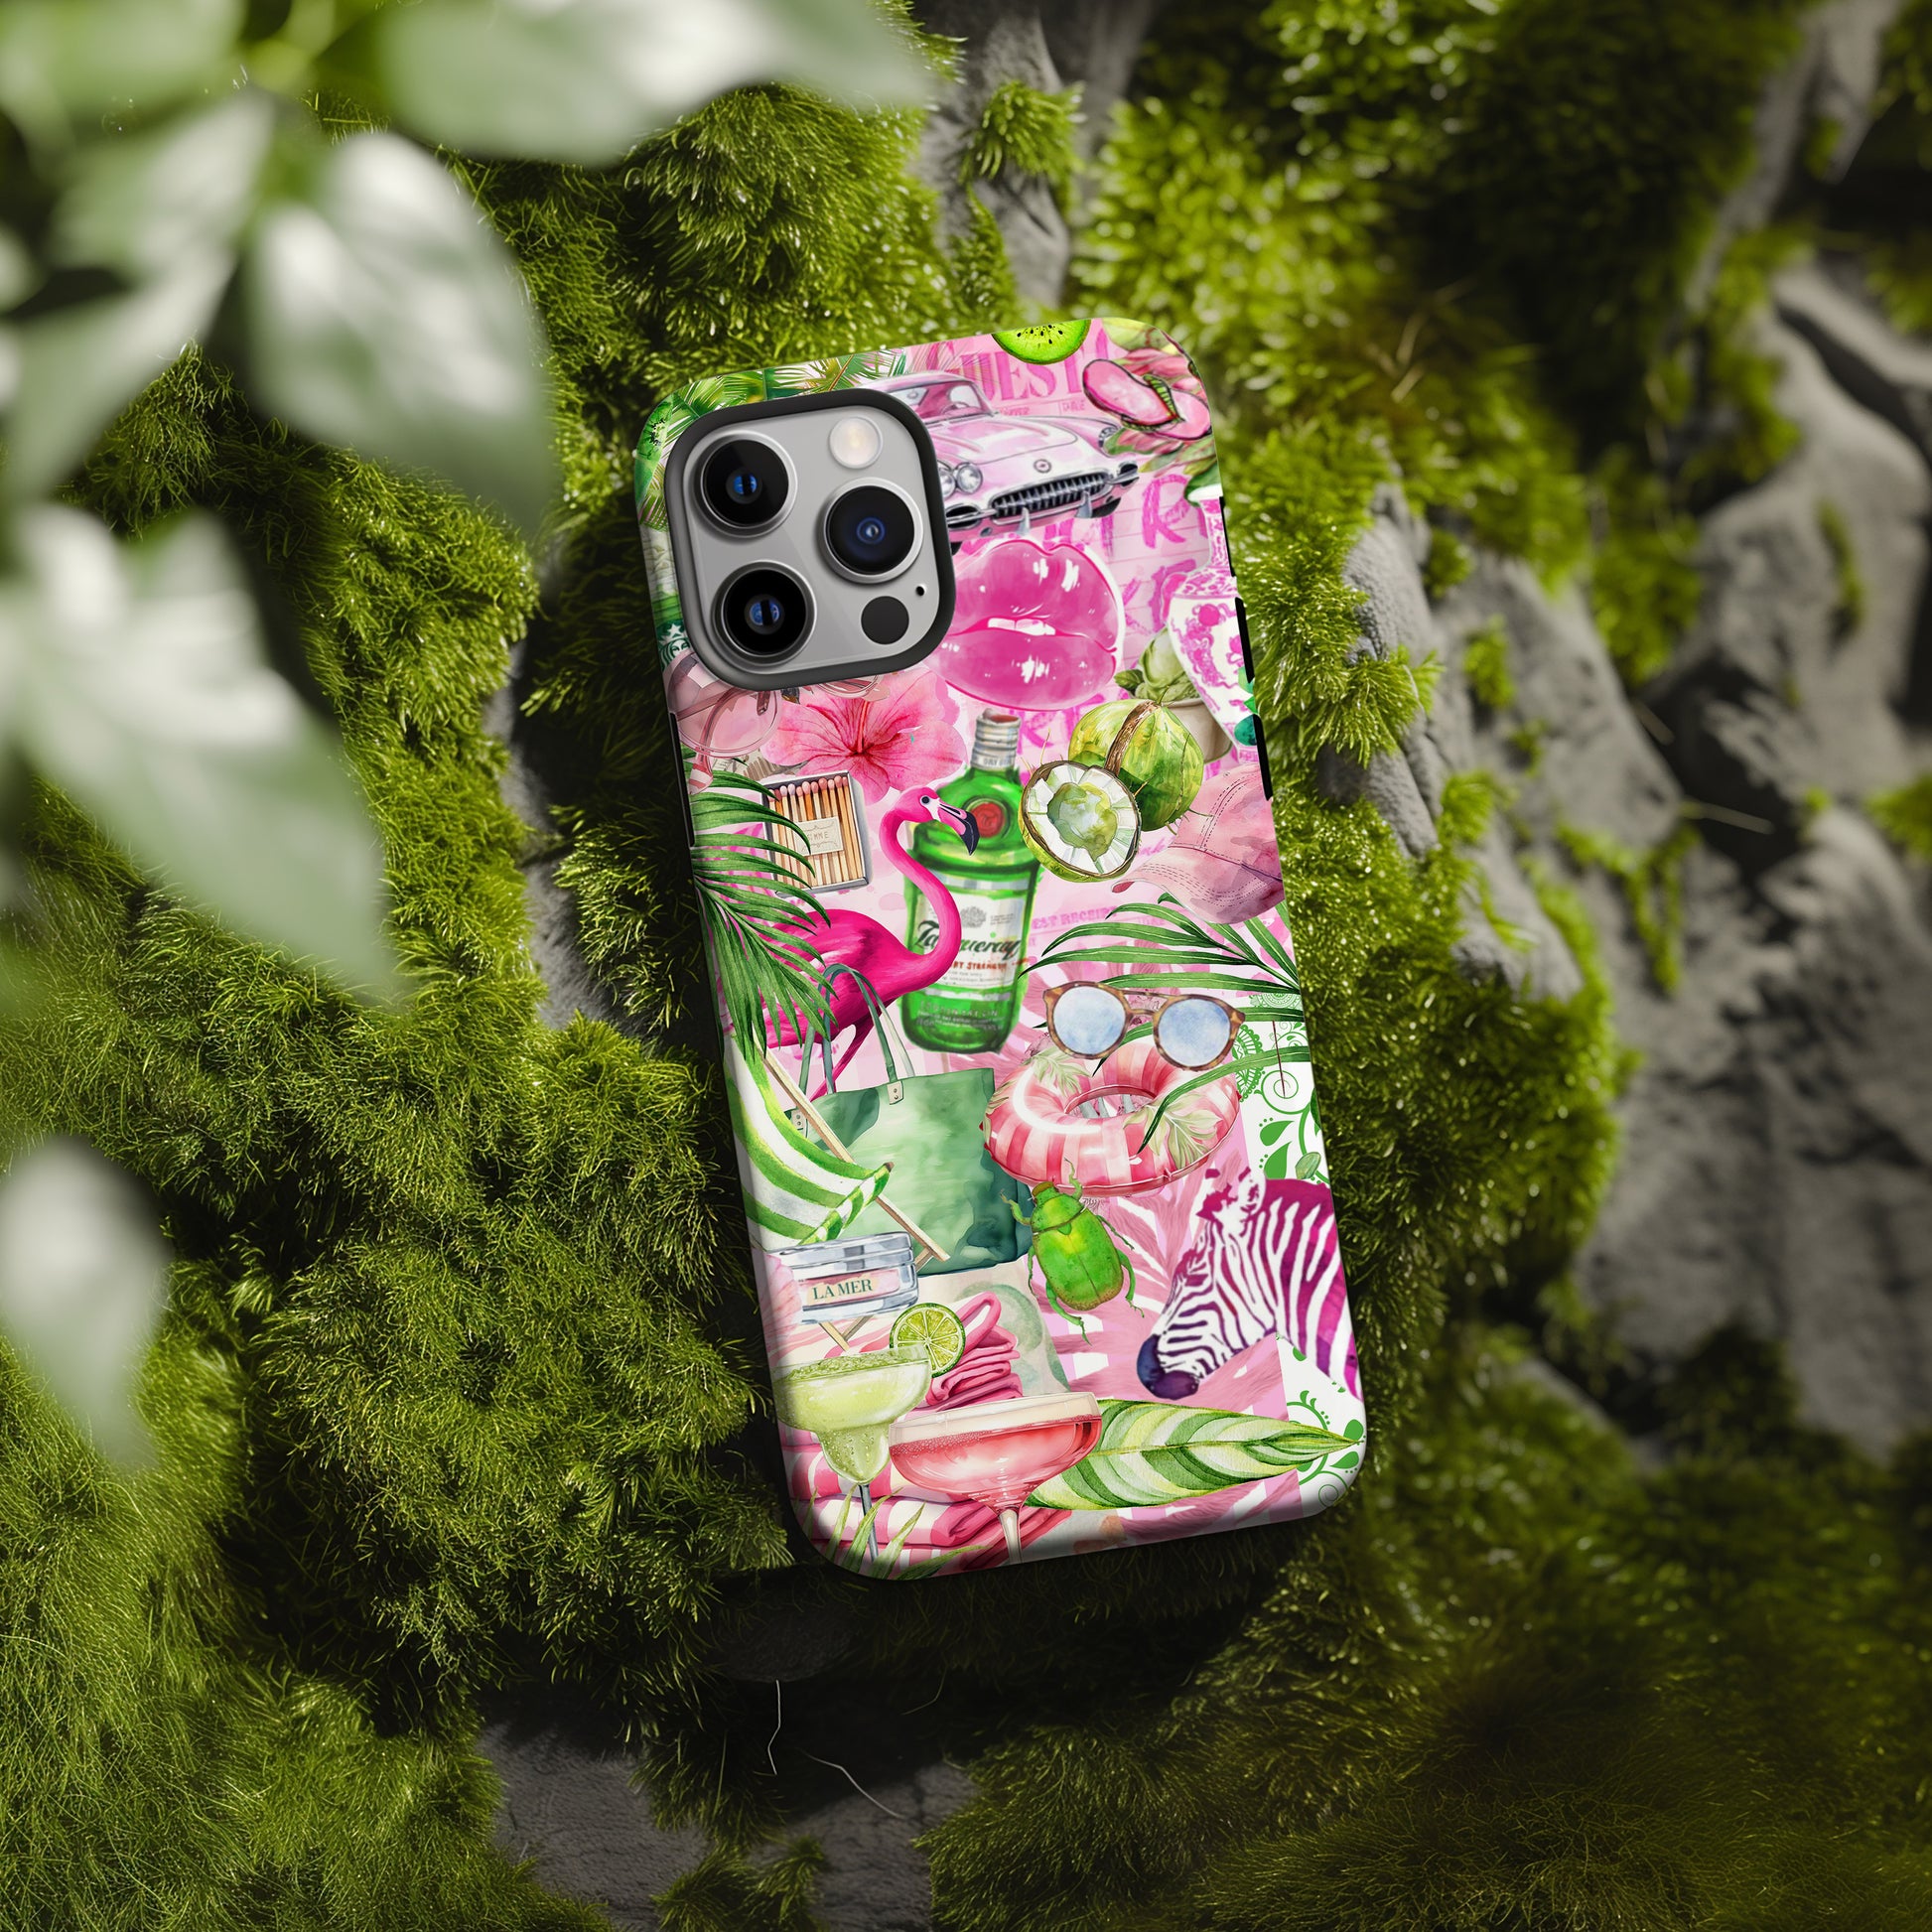 moss rock showing Palm Beach Collage Phone Case. Scrapbook style Maximalist preppy beach design. Pink and Green phone case for iPhone and Samsung Galaxy by Artscape Market